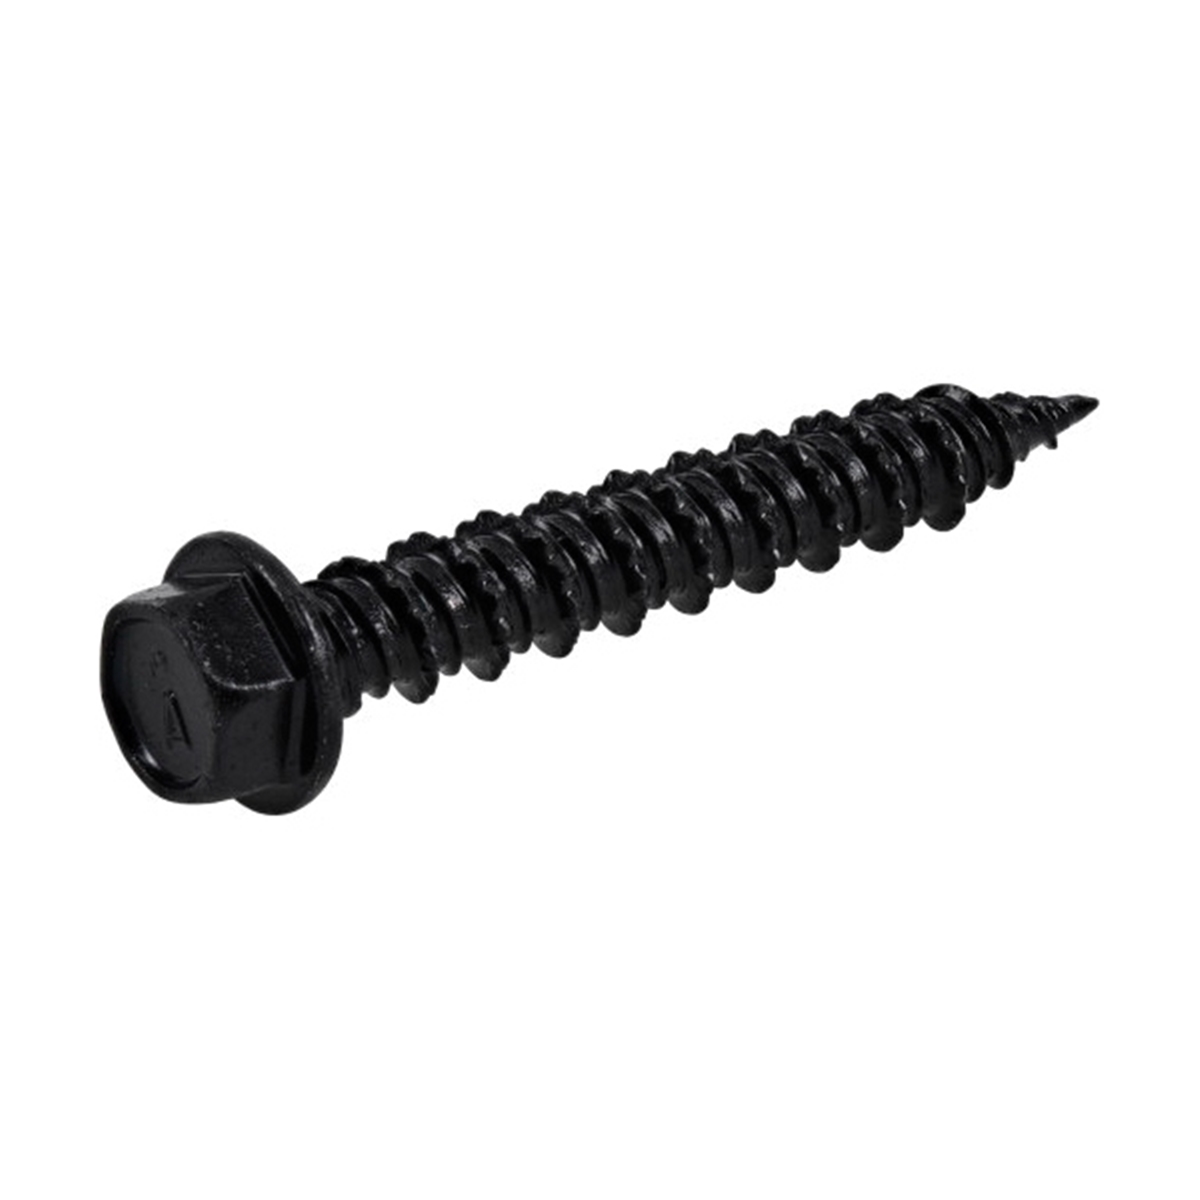 376584 Concrete Screw Anchor, 1/4 in Dia, 1-3/4 in L, Carbon Steel, Epoxy-Coated, 100/PK